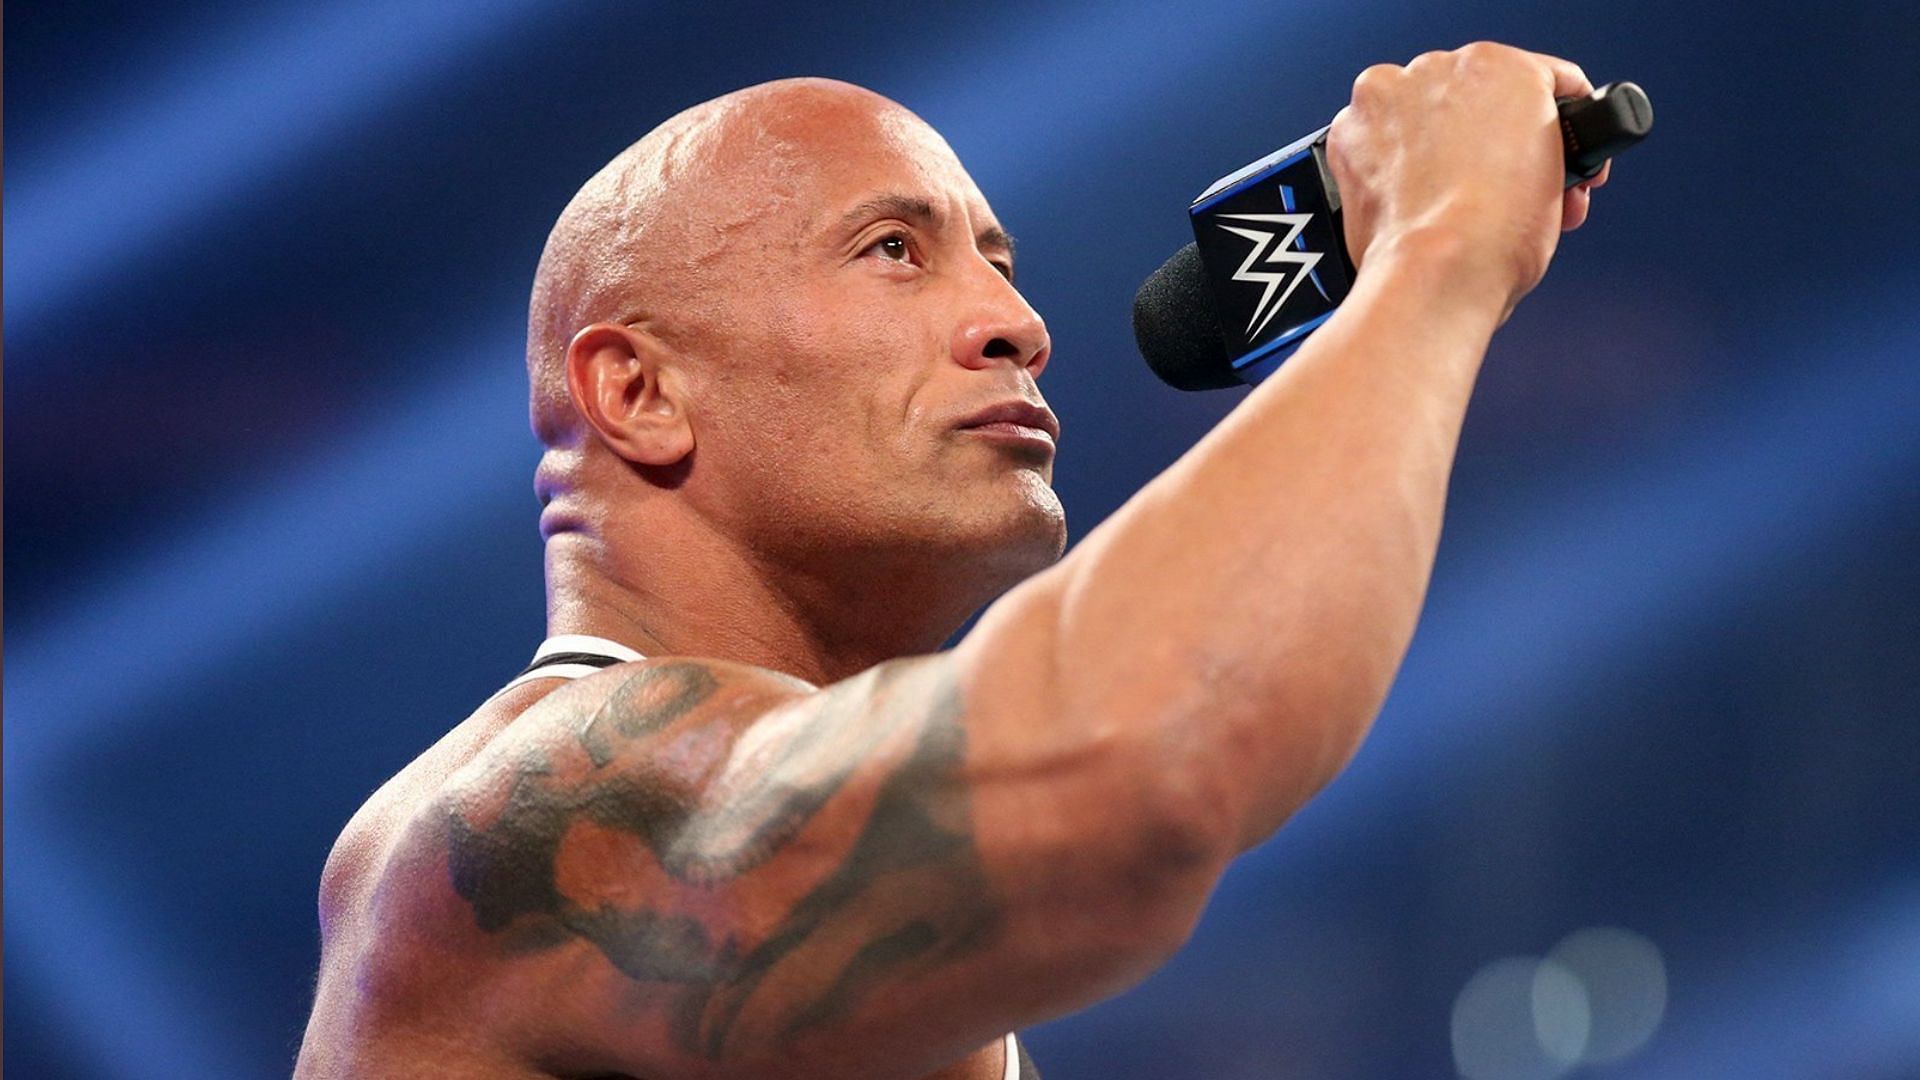 The Rock addressing the WWE Universe